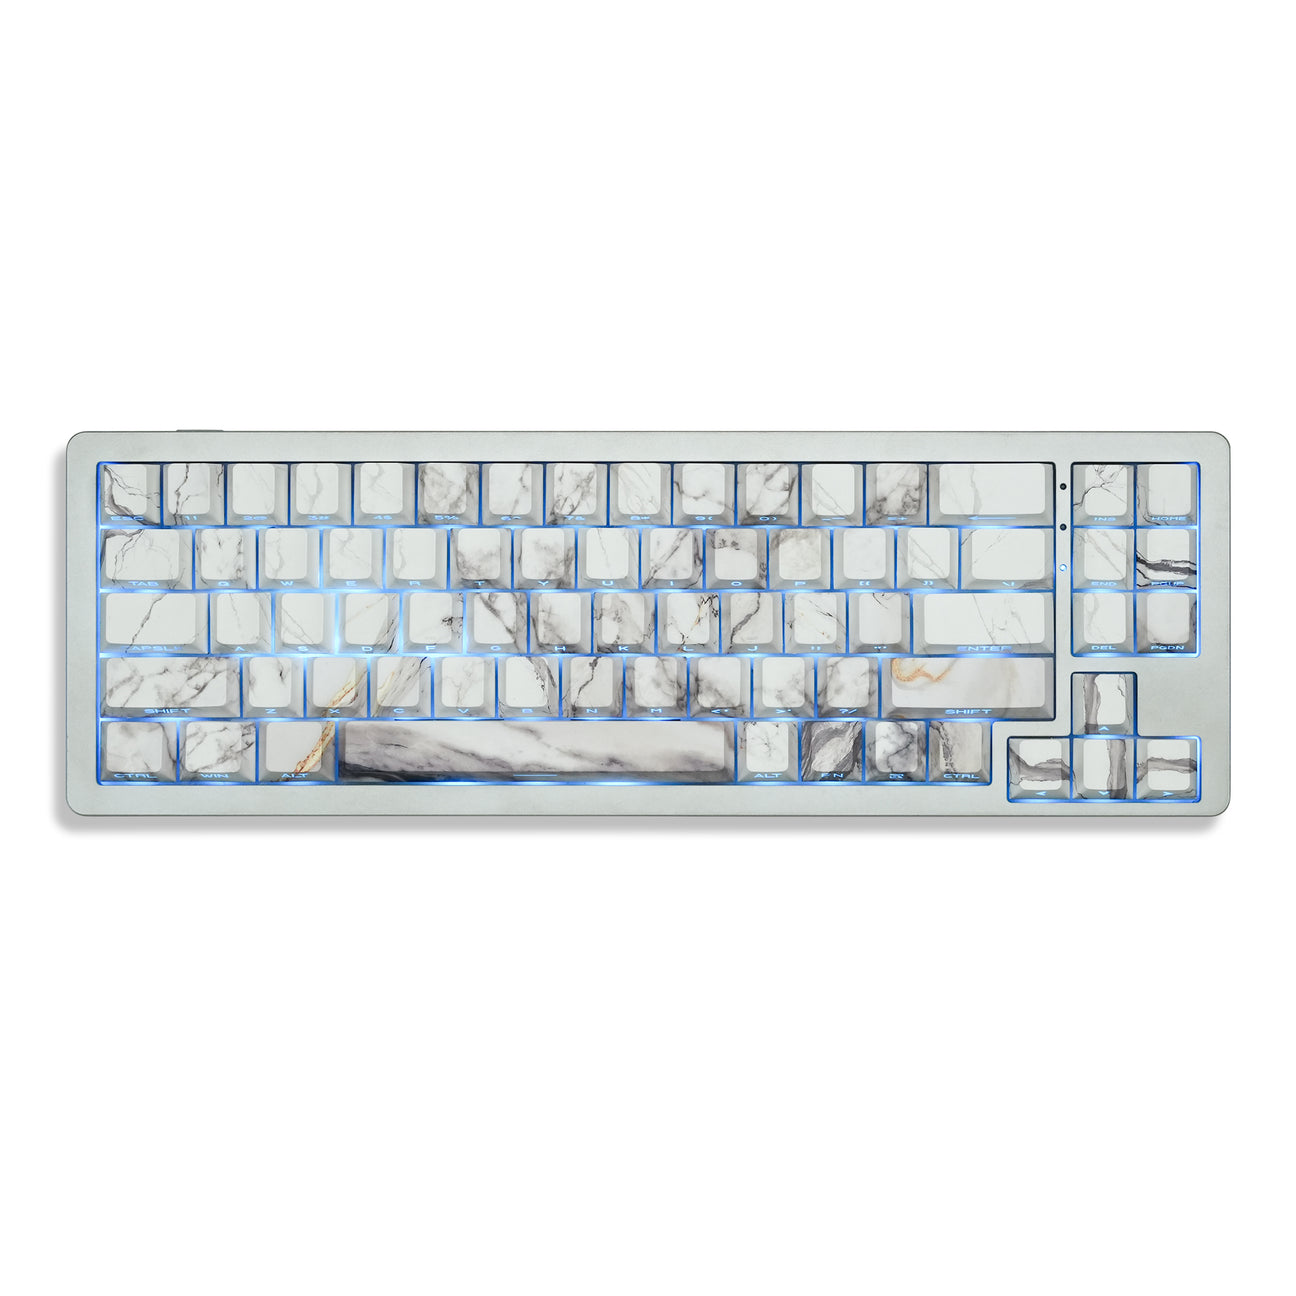 White Marble Side Backlit Cherry Pbt Keycaps